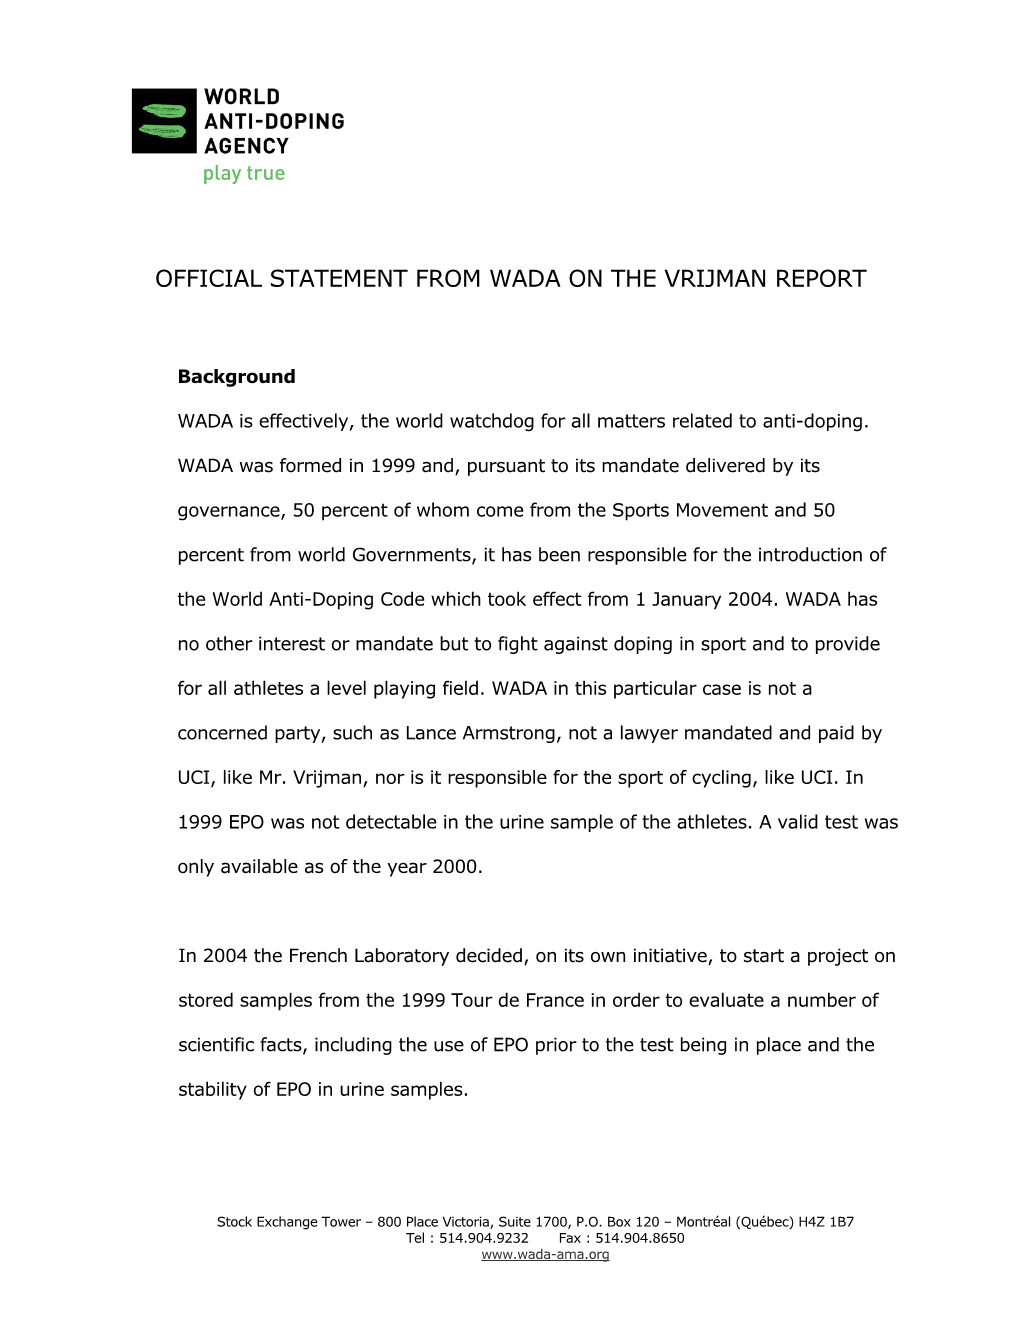 Official Statement from Wada on the Vrijman Report